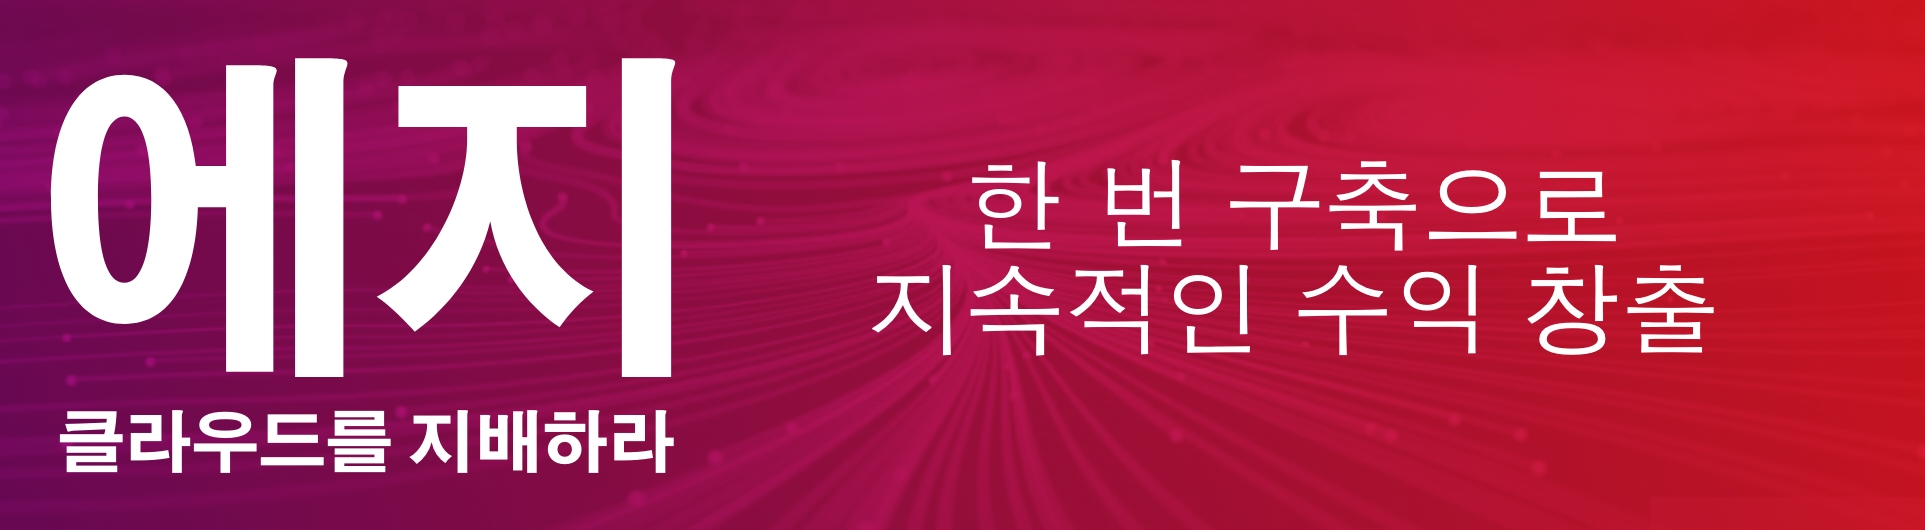 the own the edge resource landing page hero in Korean